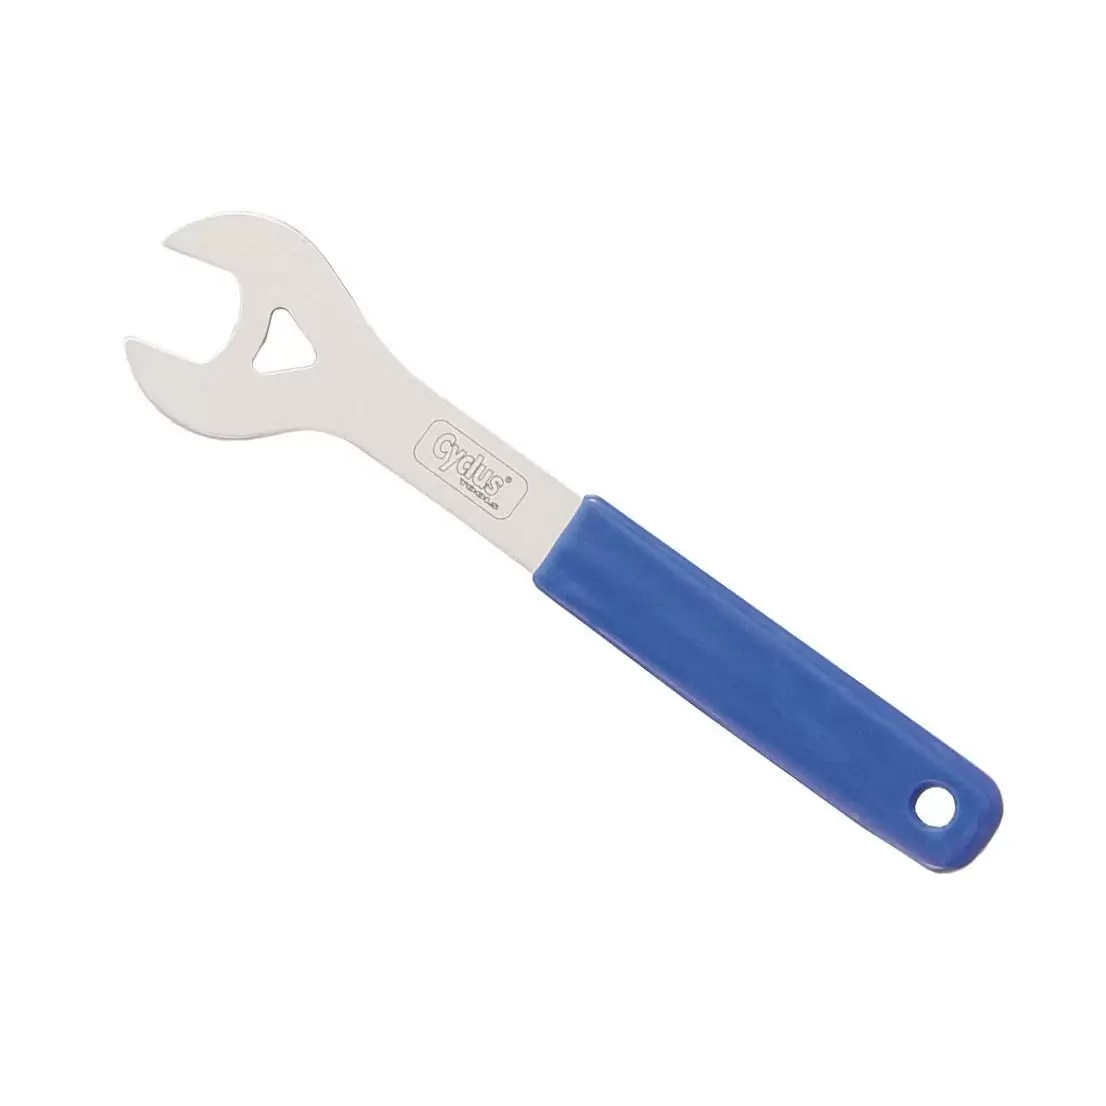 Hub cone spanner wrench 20 mm - image